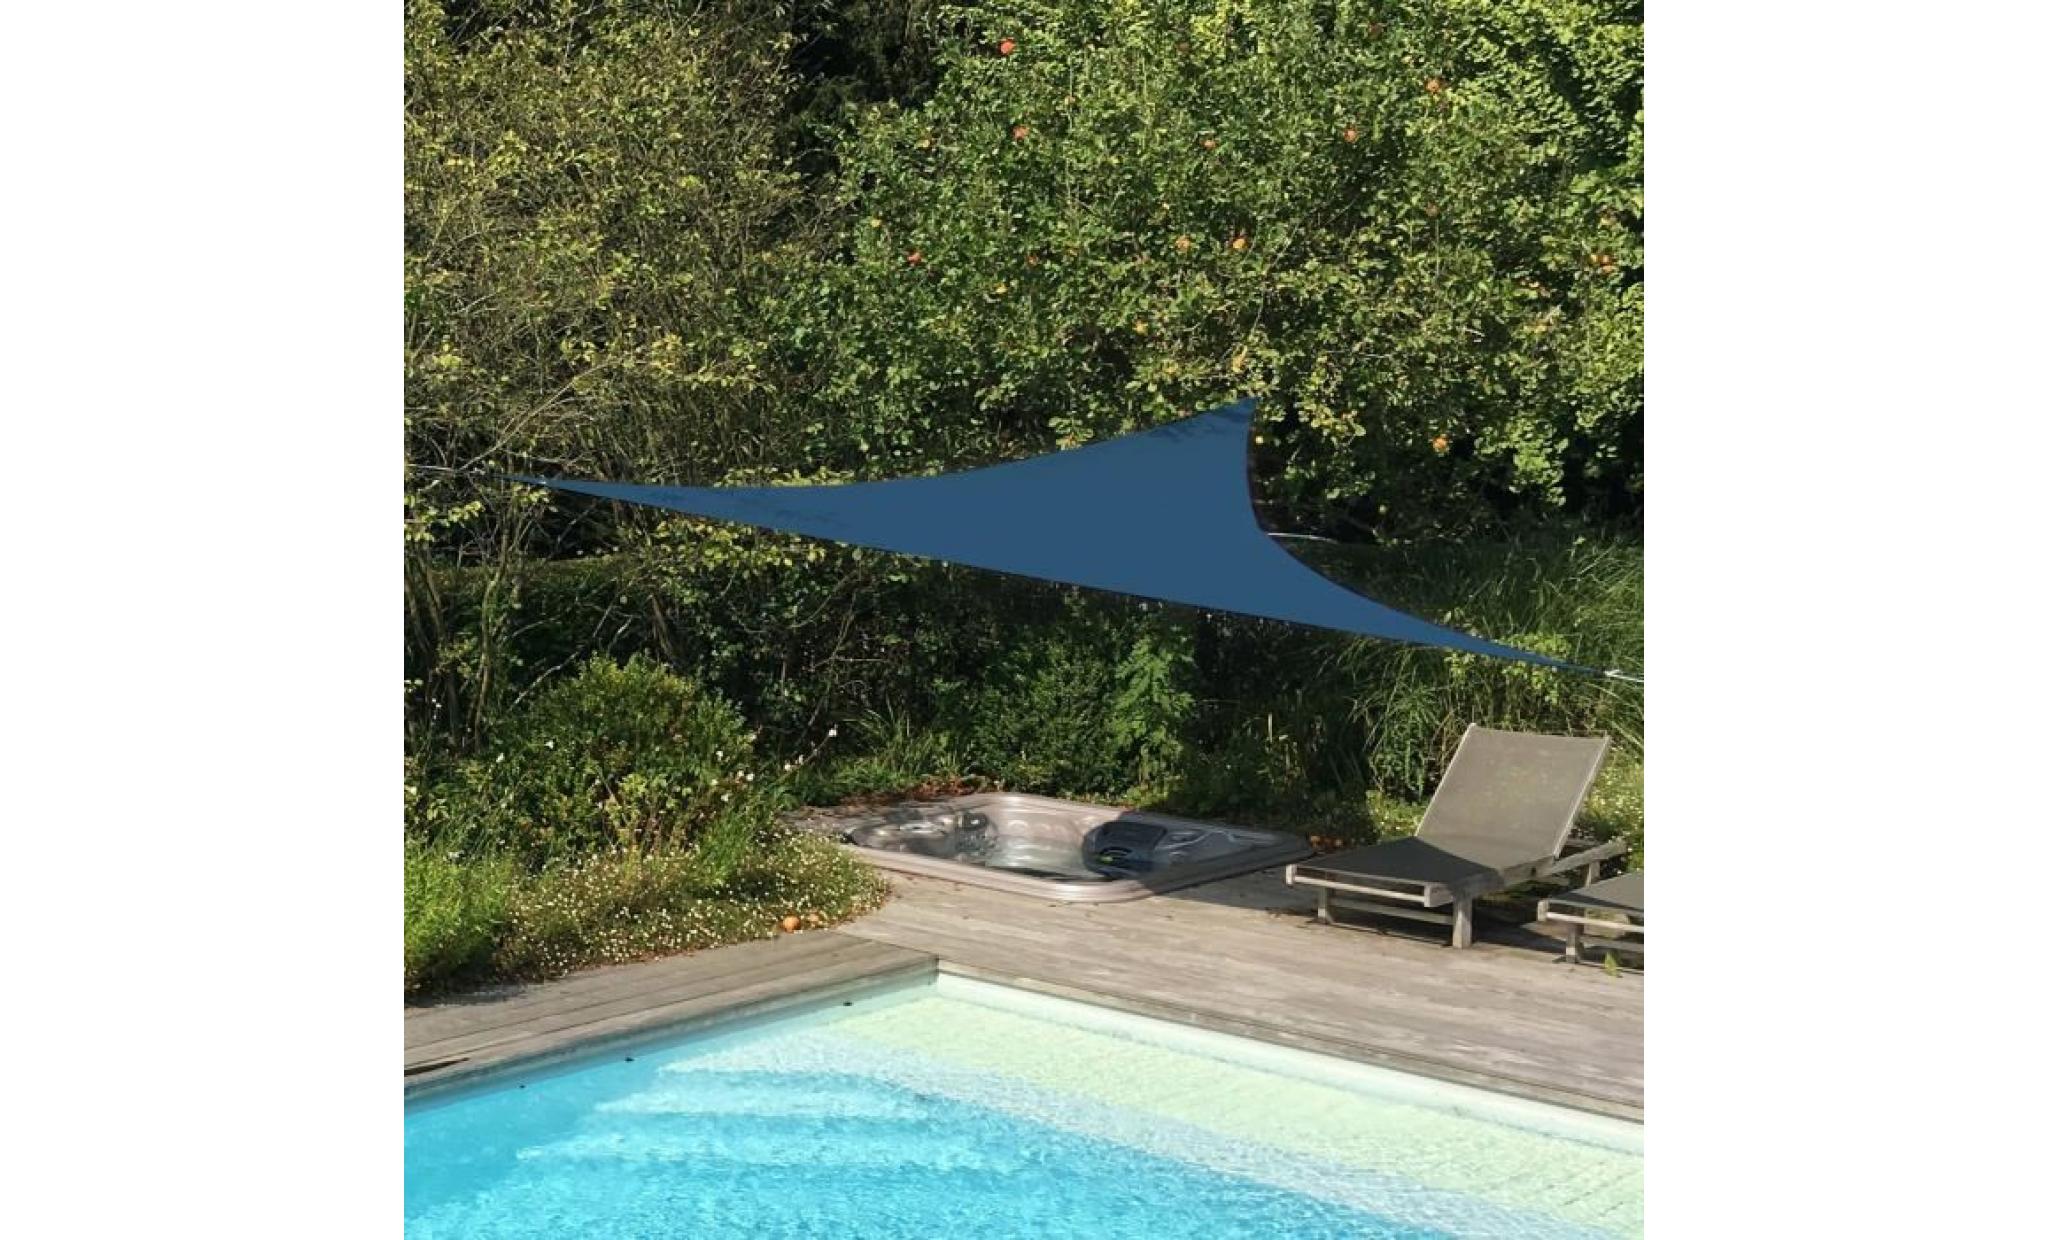 voile d’ombrage triangulaire extensible easywind 3,6 x 3,6 x 3,6m   gris   anti uv upf 50+ pas cher